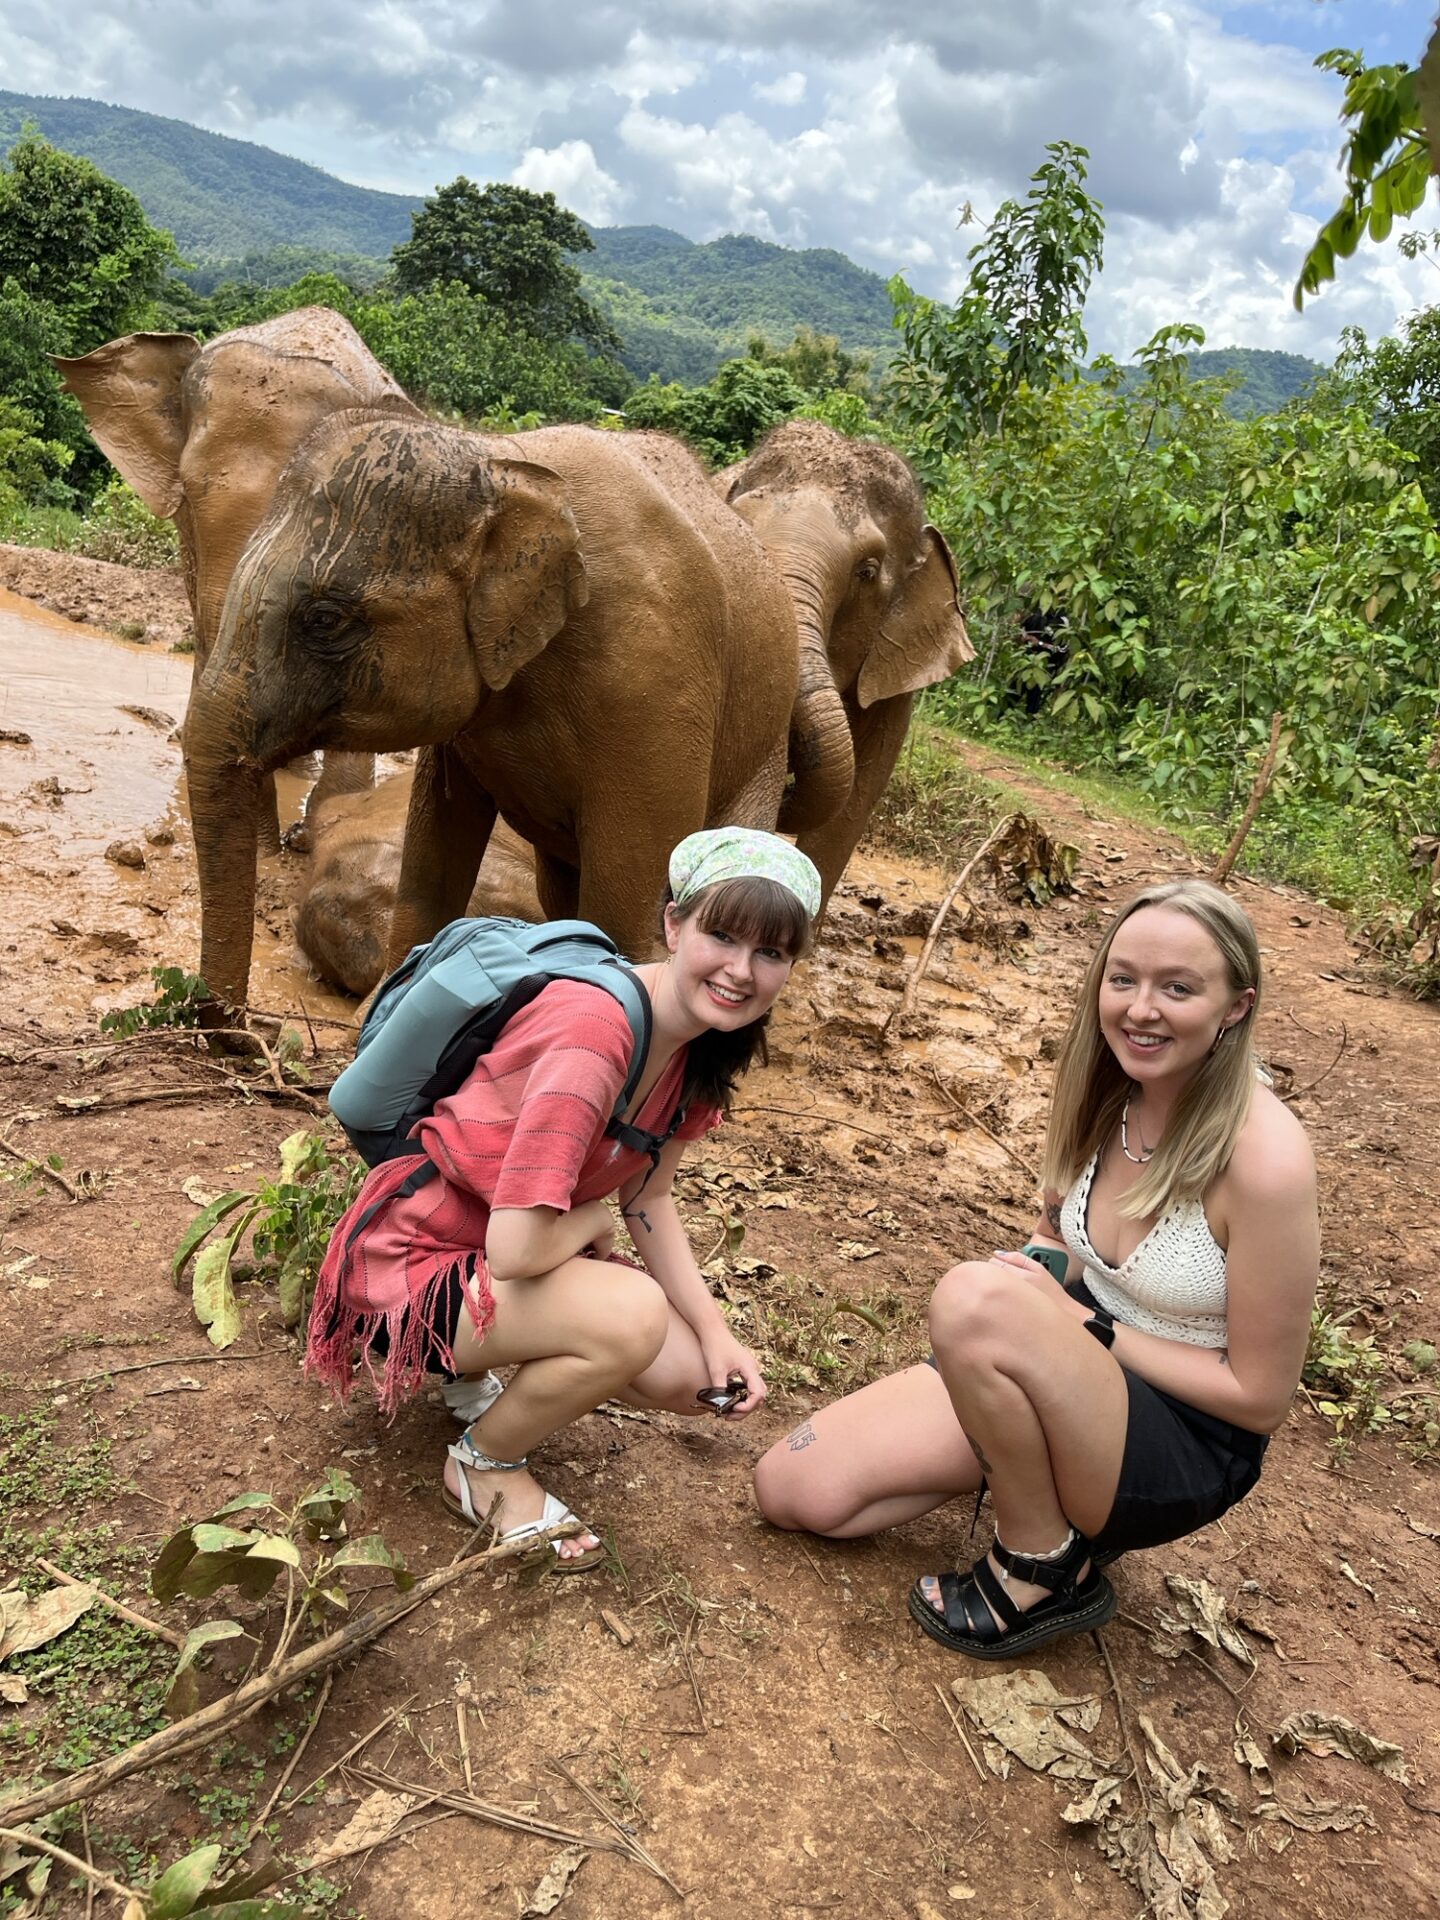 Chloe and Elicia crouched in front of a herd of elephants.